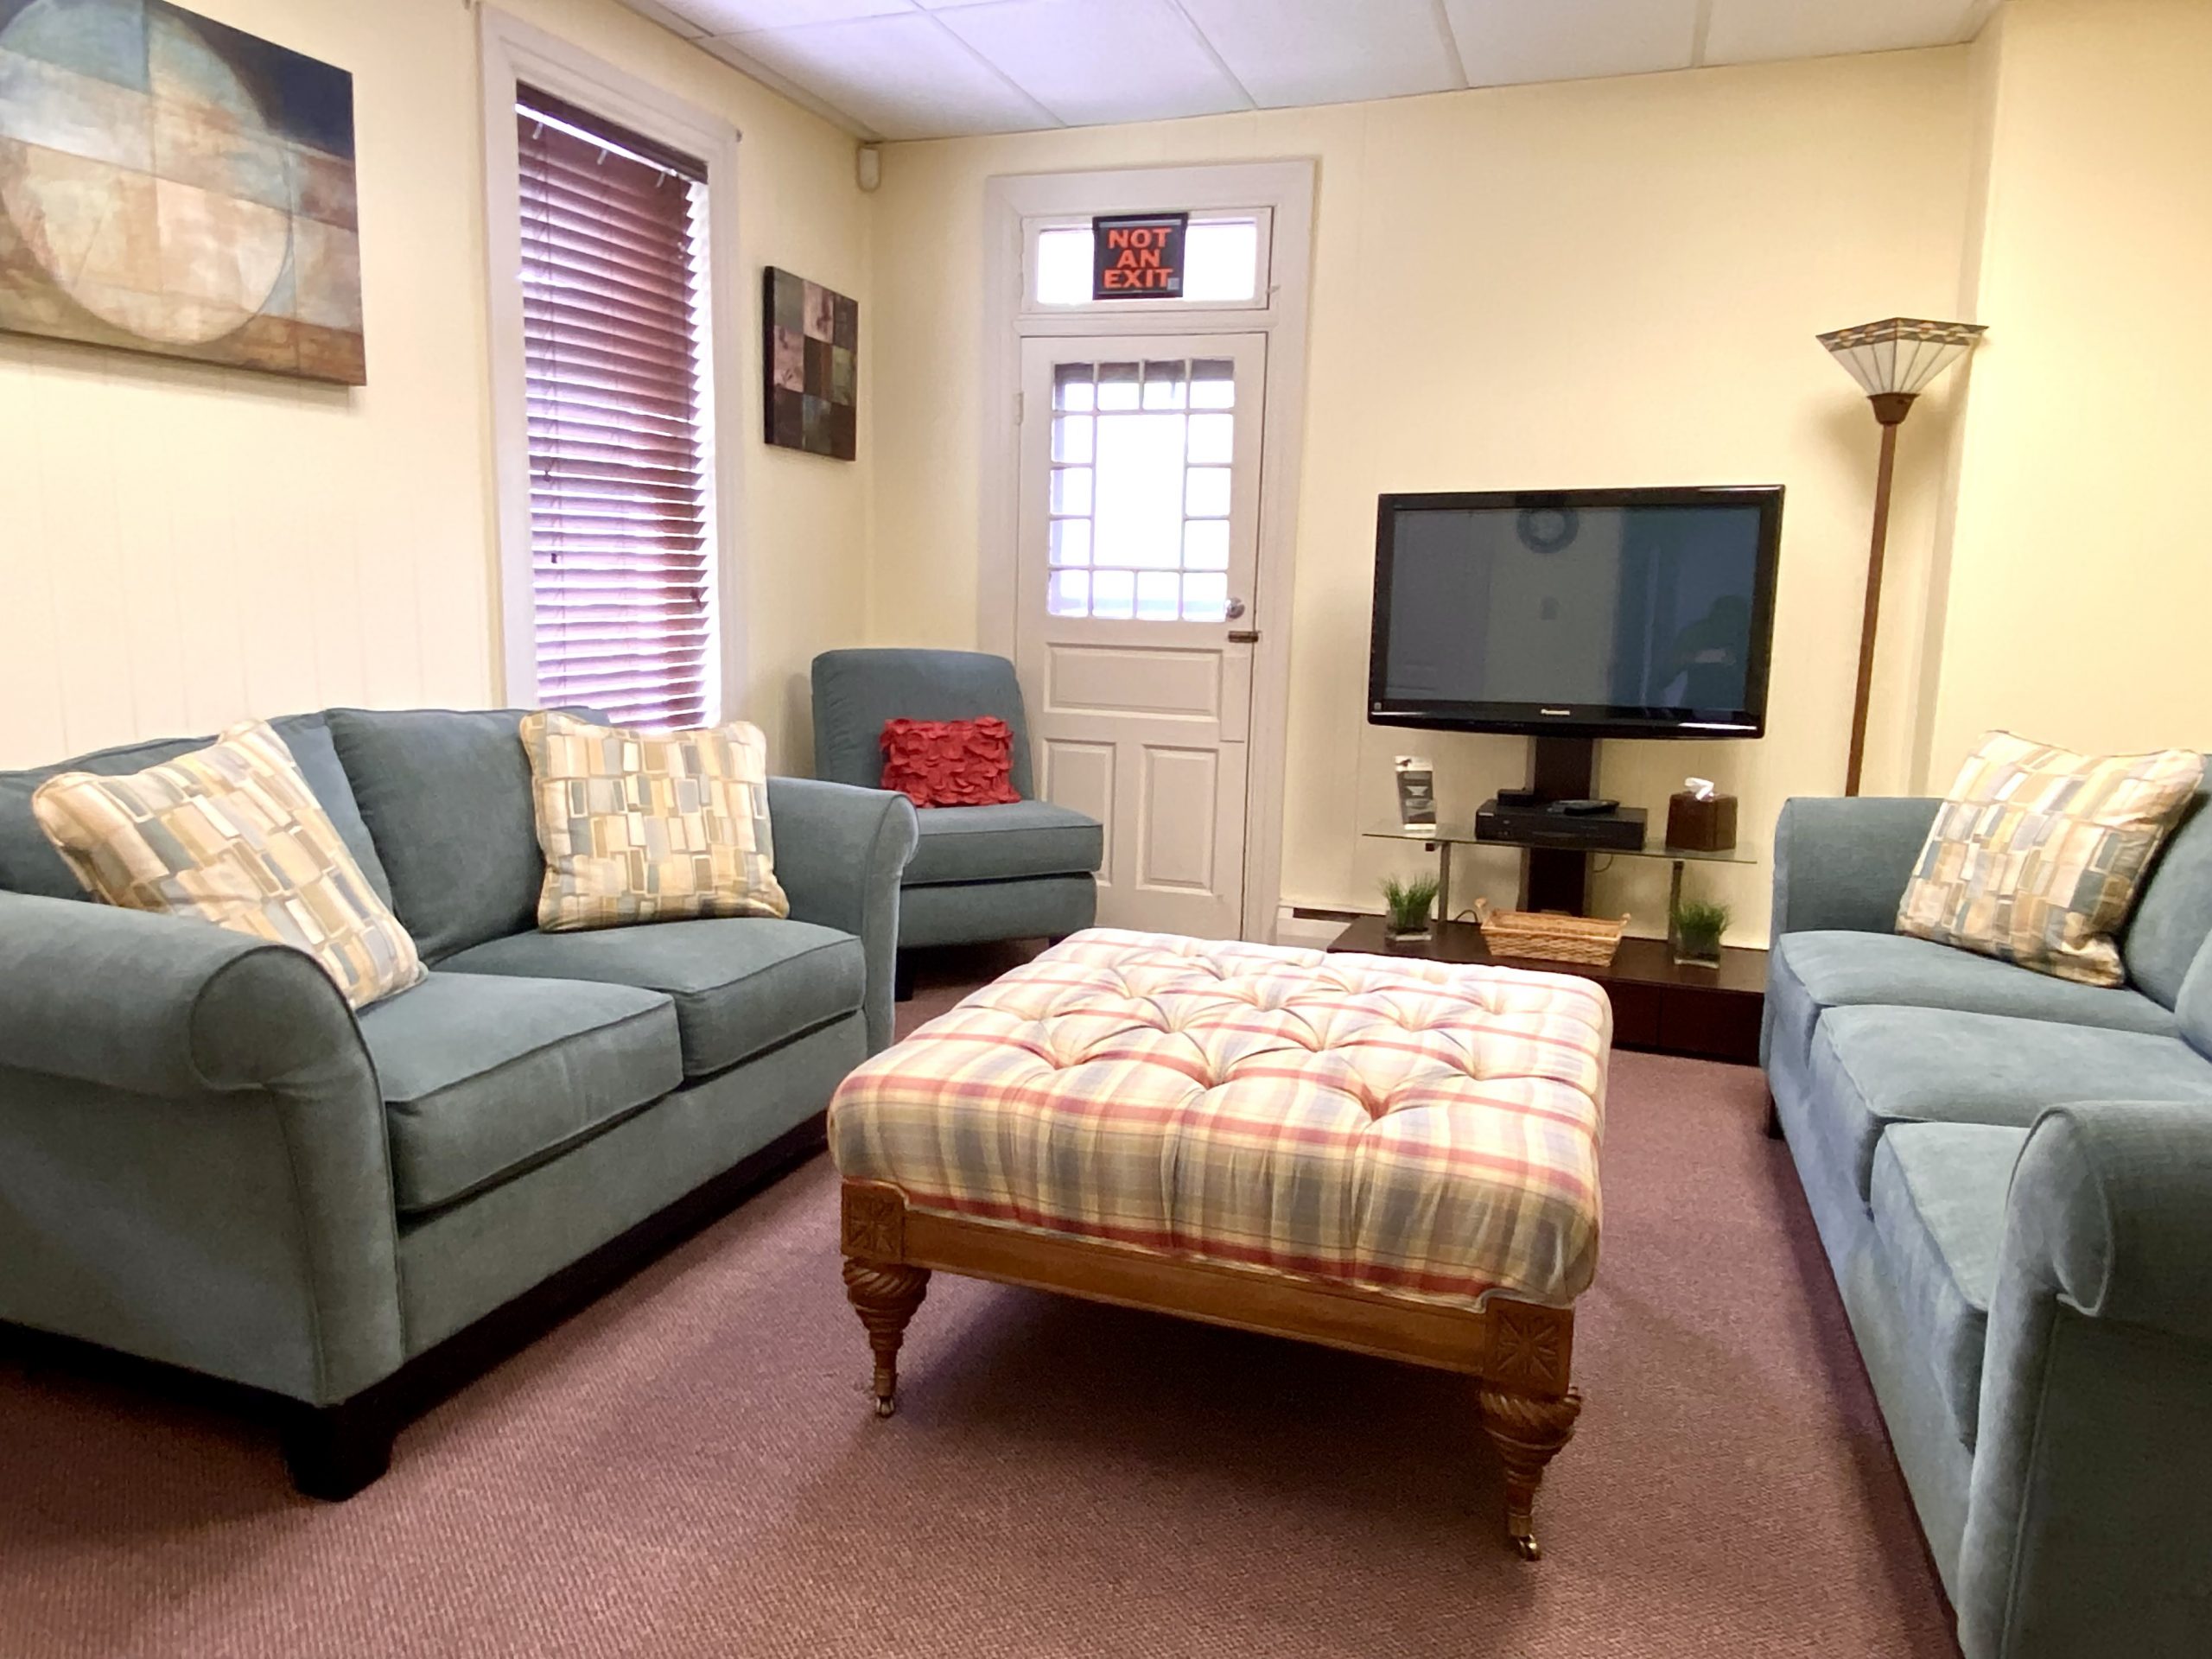 When we learned that college-aged grievers were feeling a bit left out at Olivia’s House, we moved quickly to design a space just for them! This room has a peaceful and mature feel. Overstuffed sofas, a big screen television and a private location in the back of the house make the young adult room both comfortable and useful!